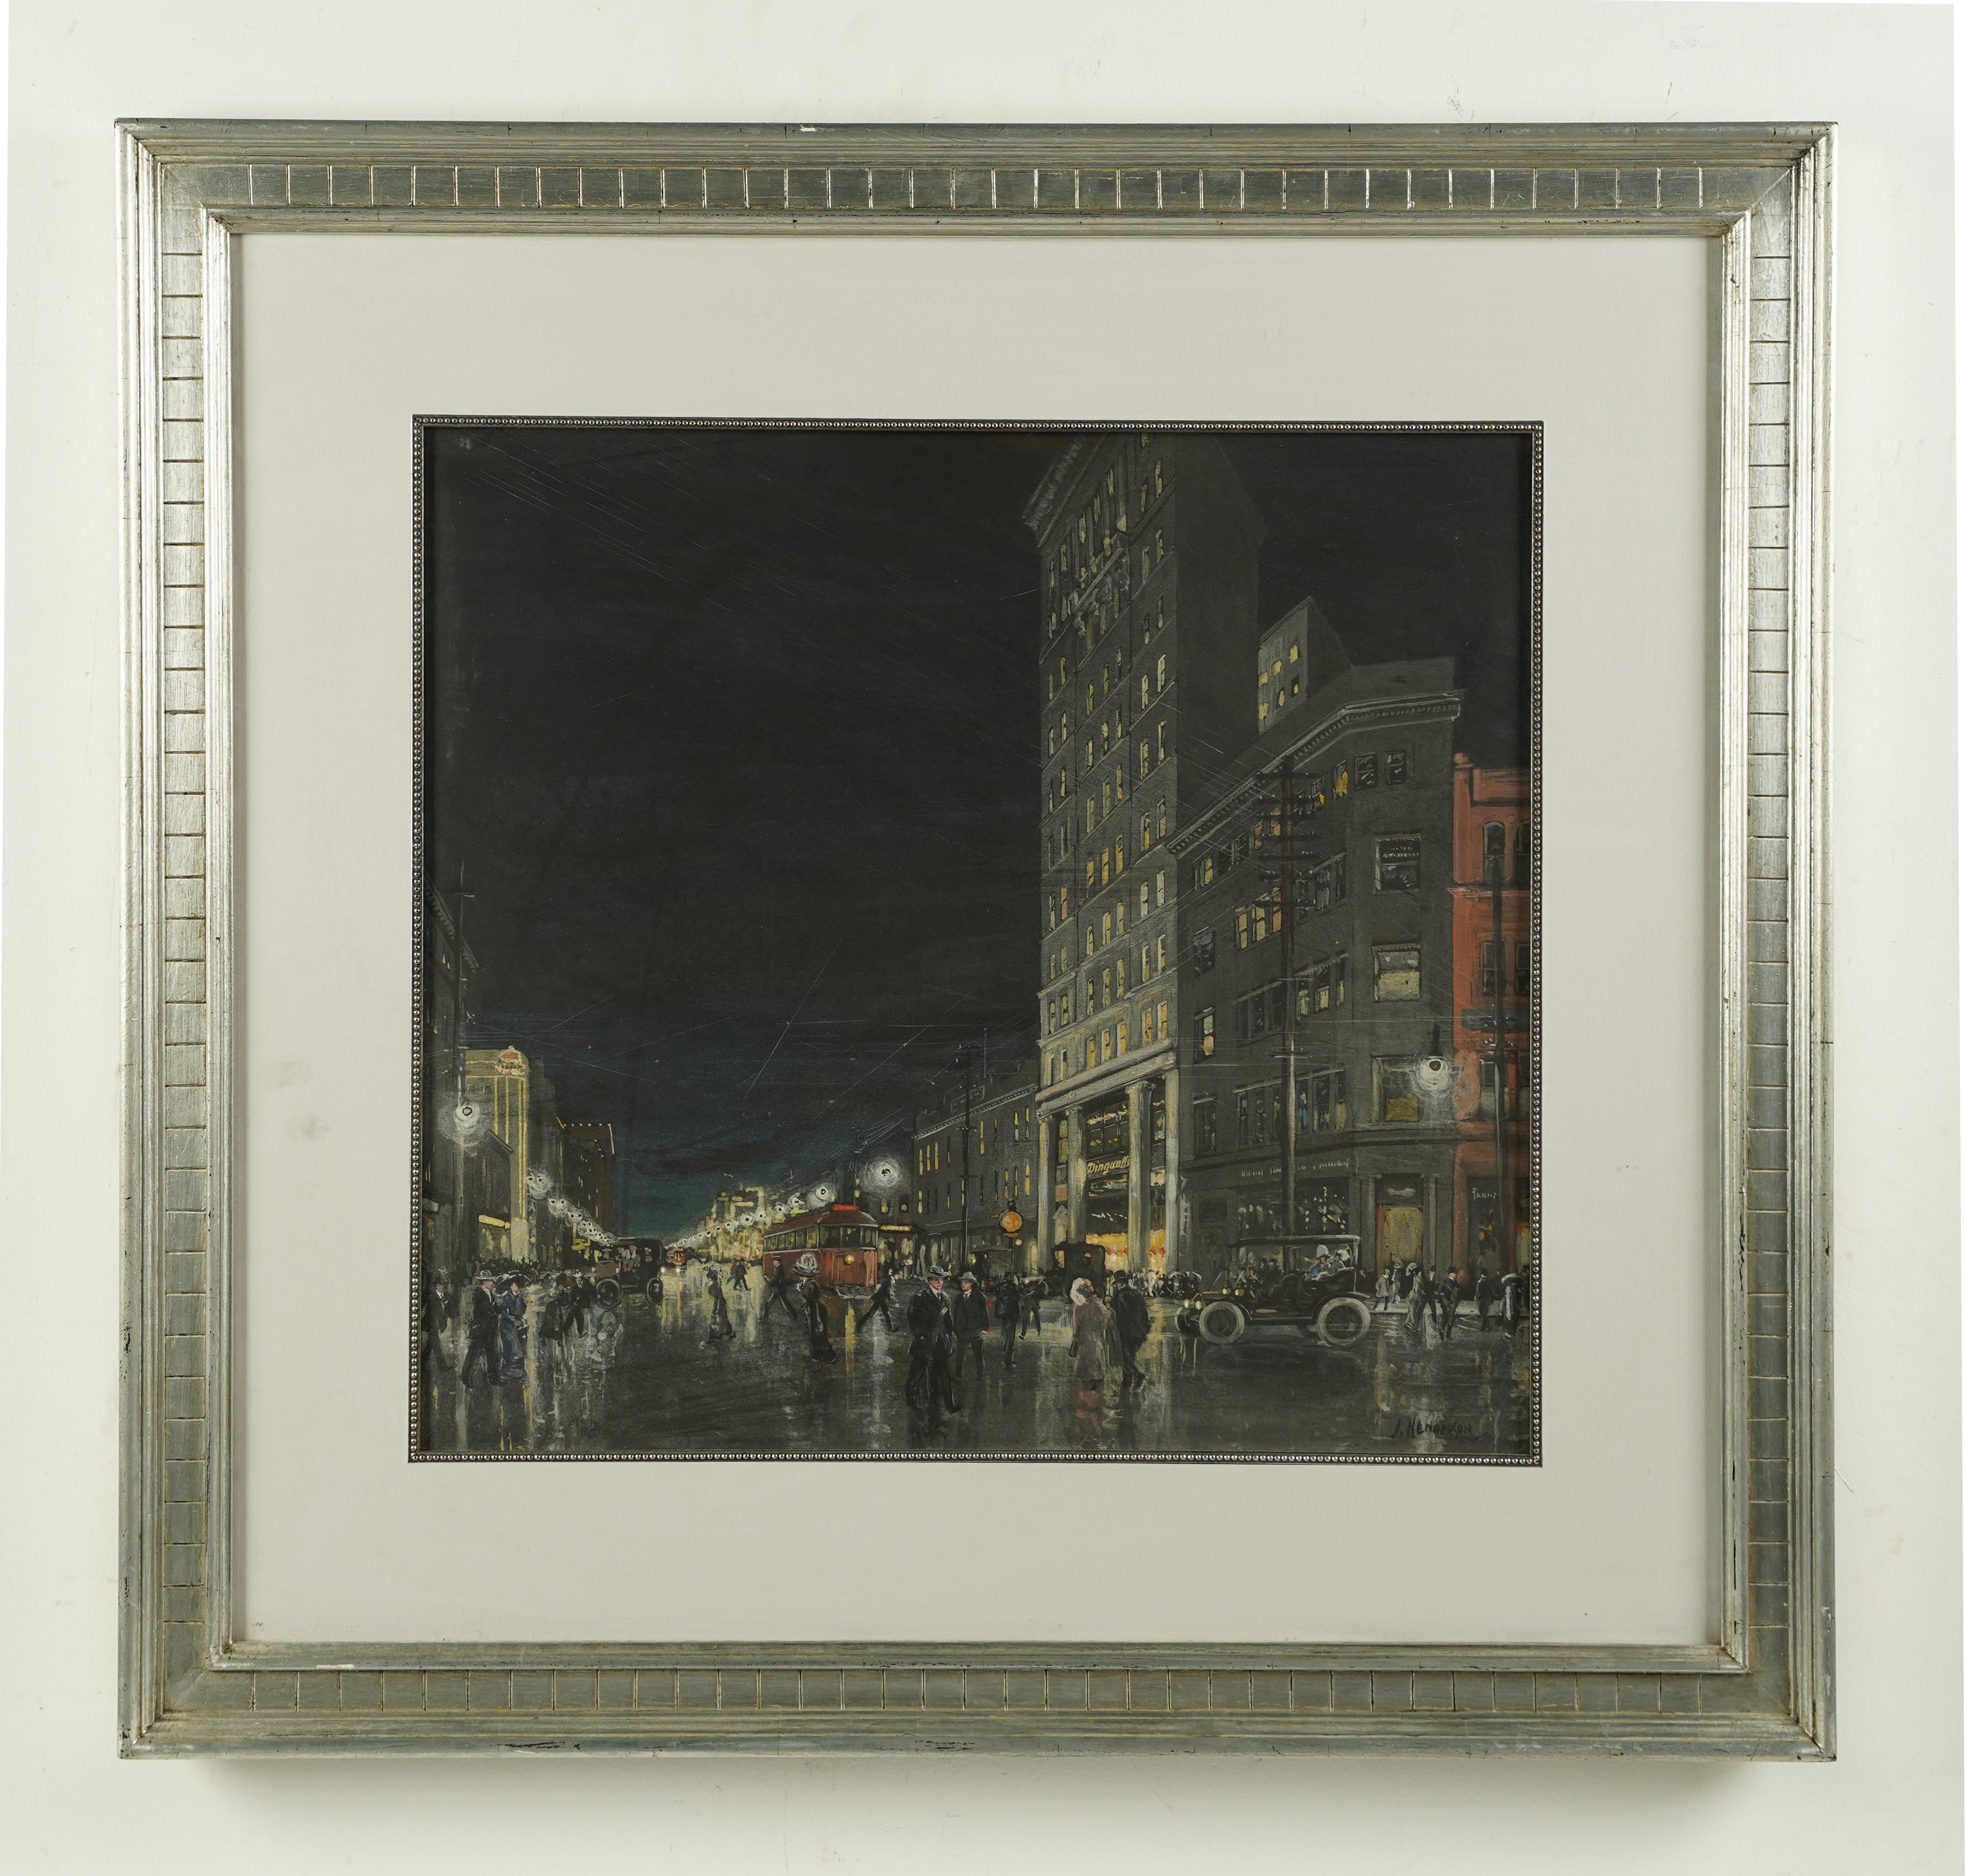 Large Antique modernist street scene painting.  Oil and gouache on board.  Signed.  Framed.  Image size, 21L x 19H.